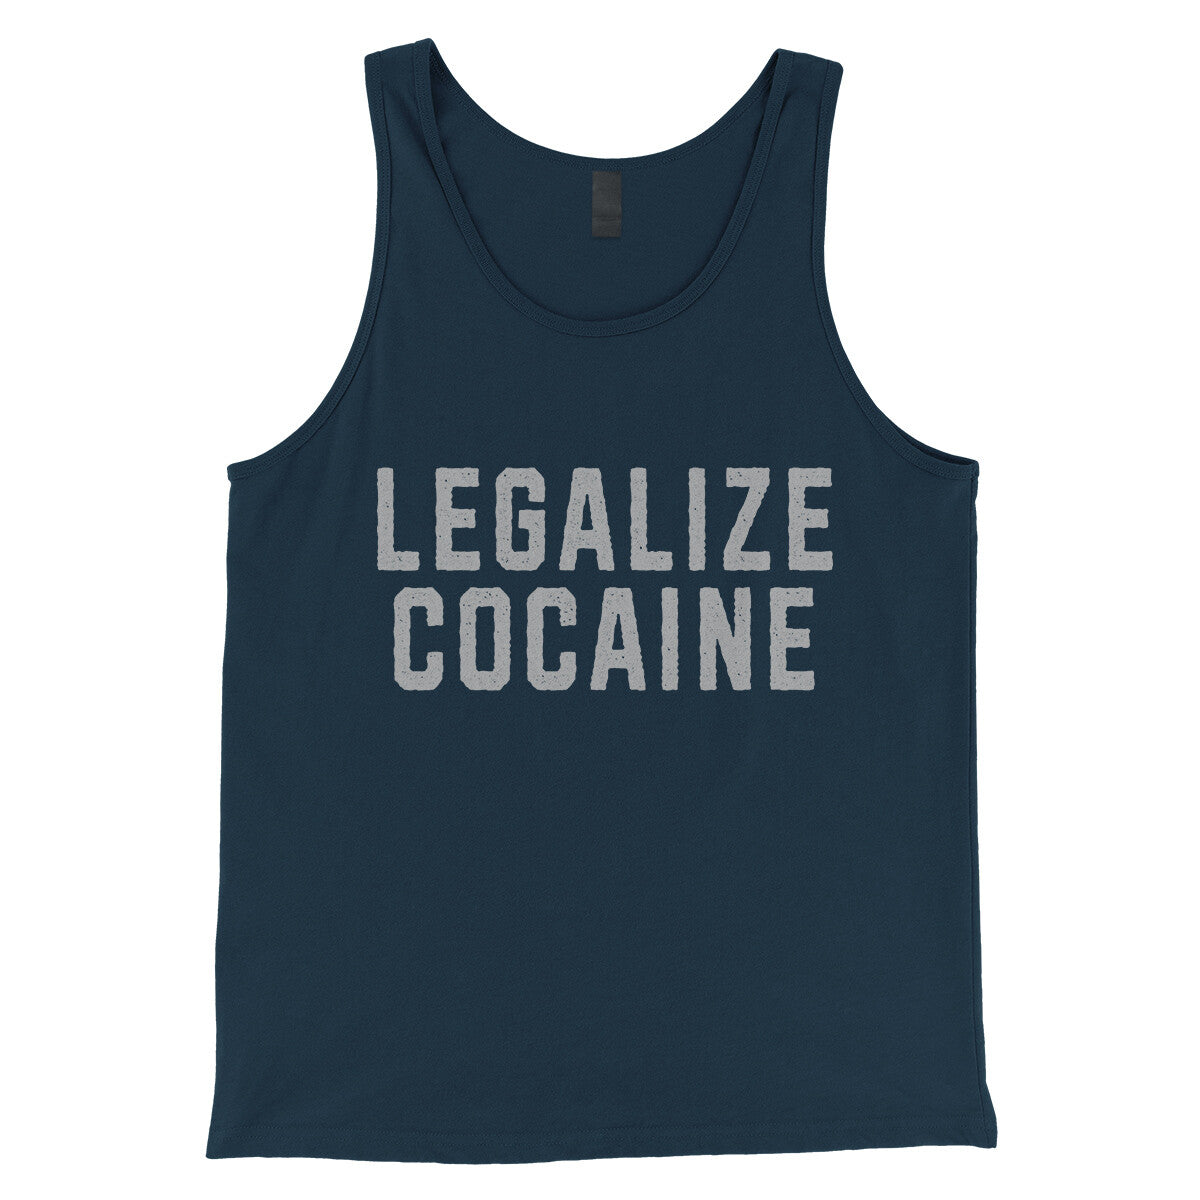 Legalize Cocaine in Navy Color